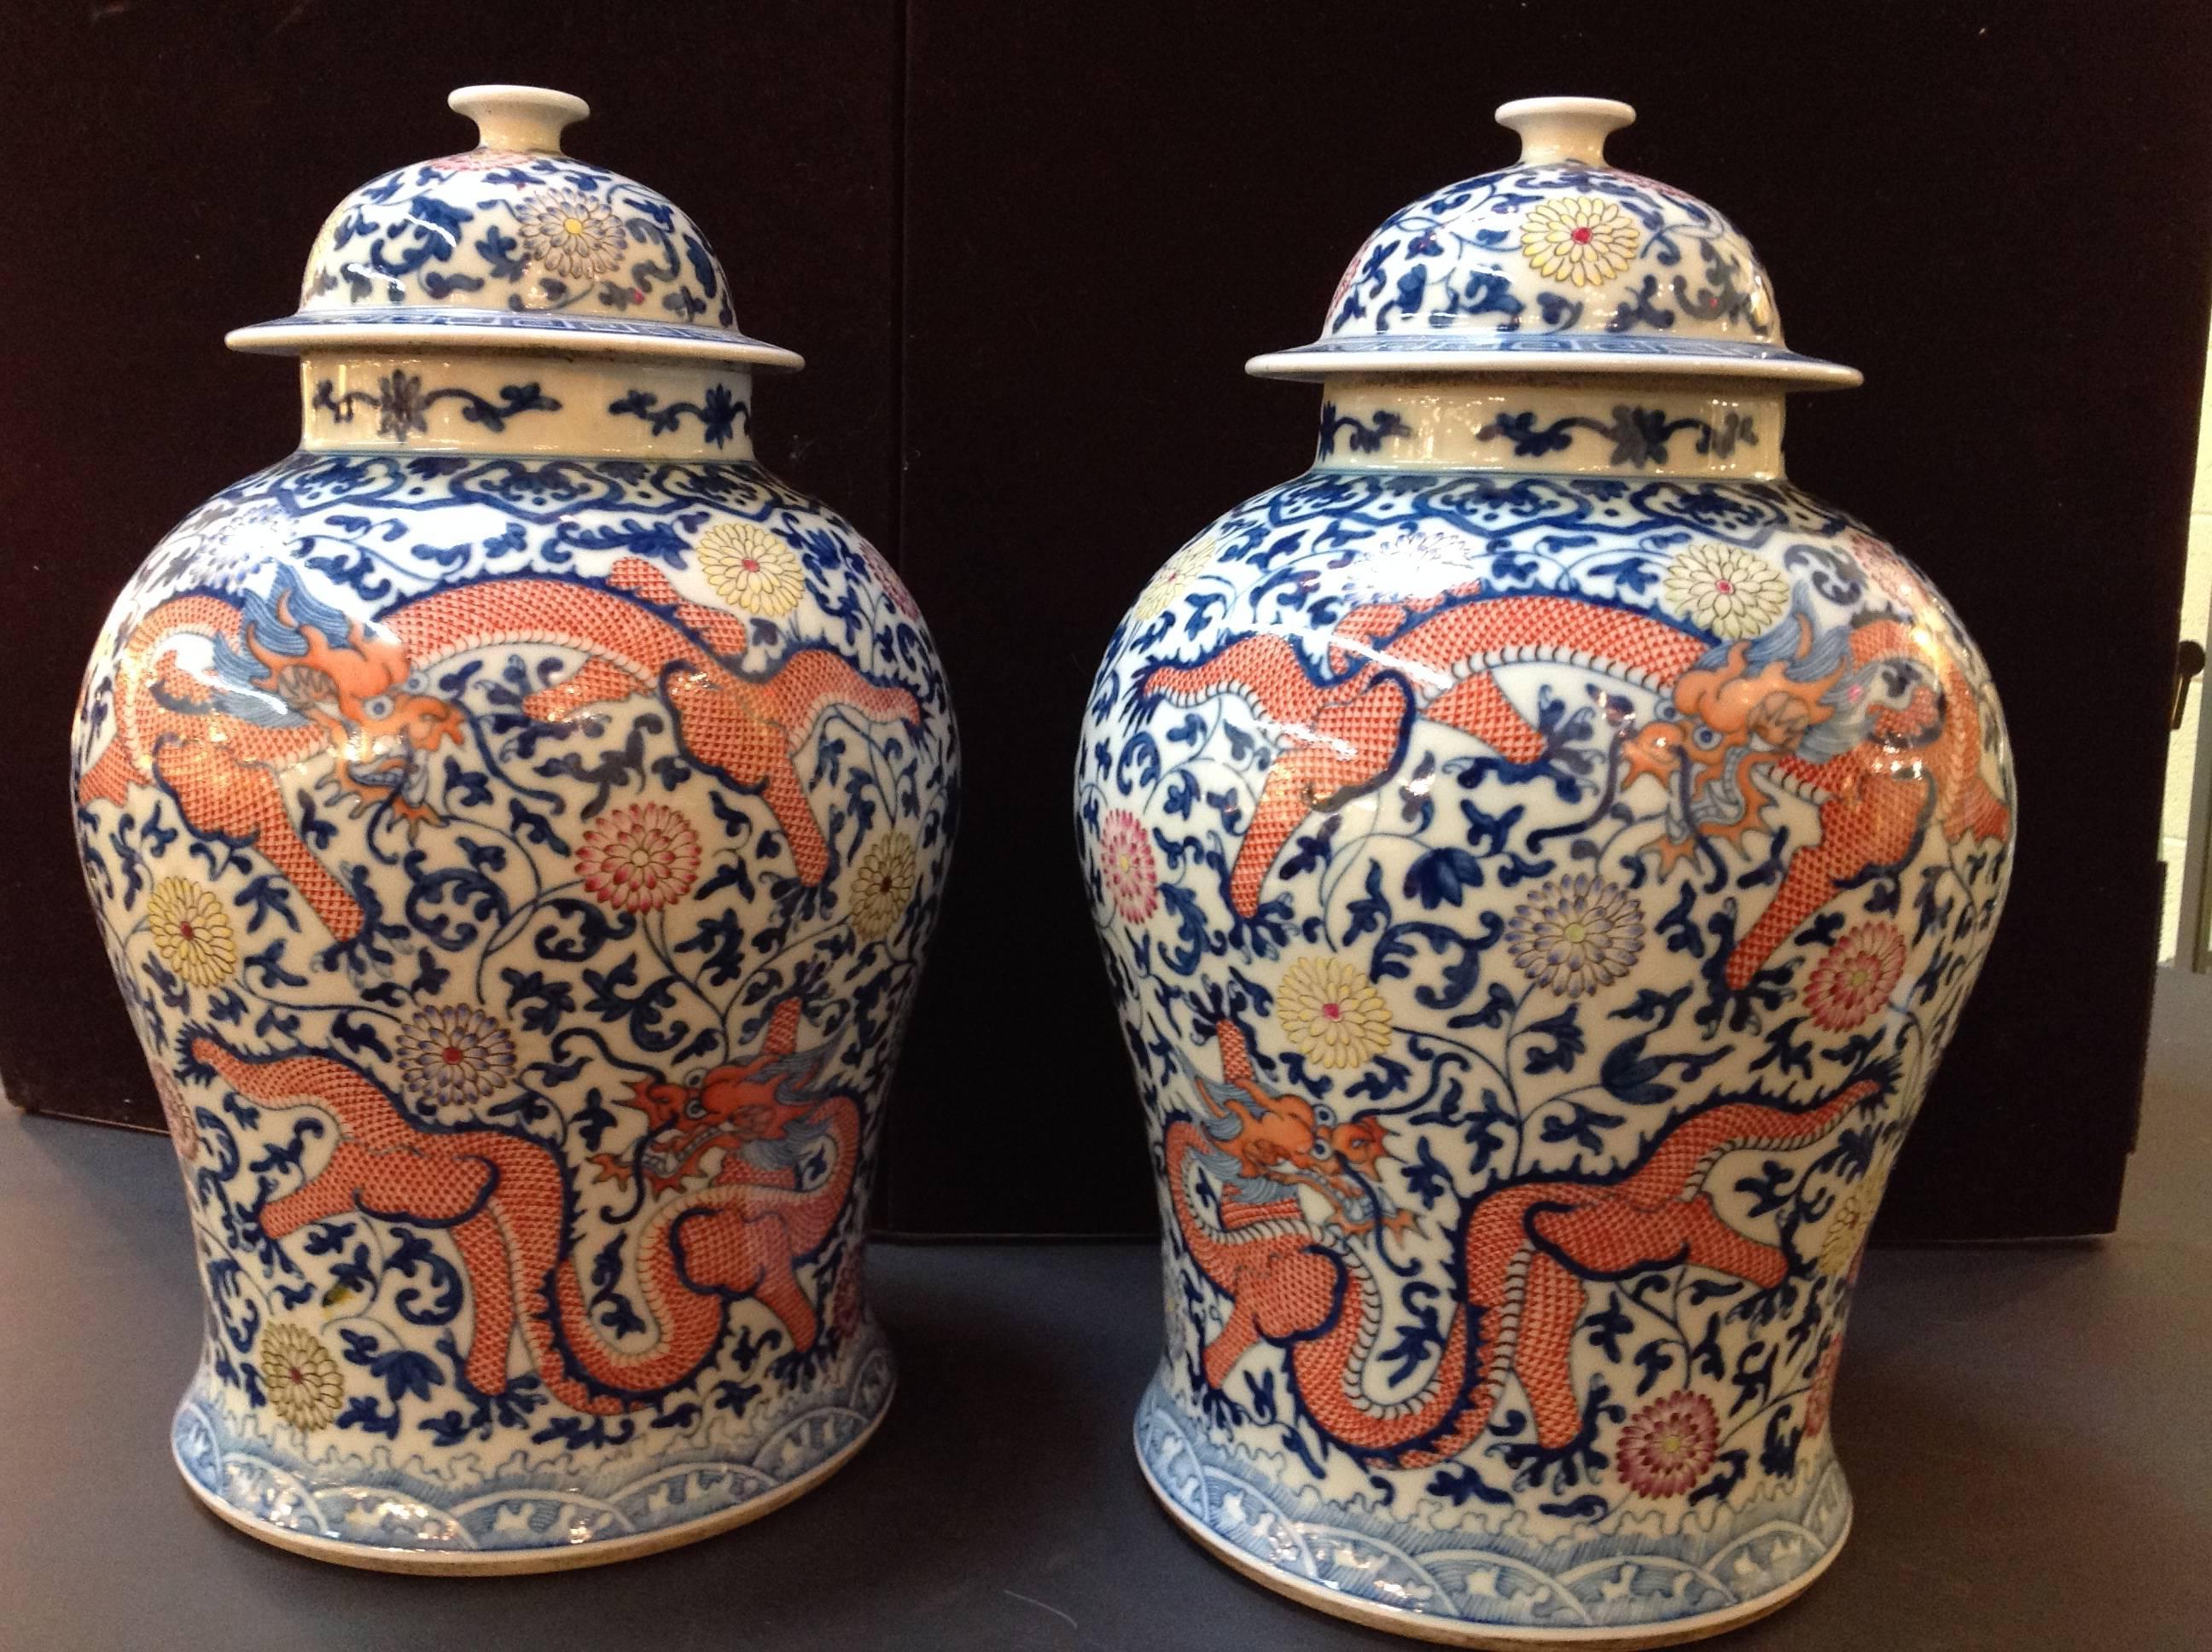 This gorgeous pair of antique temple jars from China are in mint condition and have orange dragons in two poses along with beautiful yellow, aubergene and two shades of blue flowers.